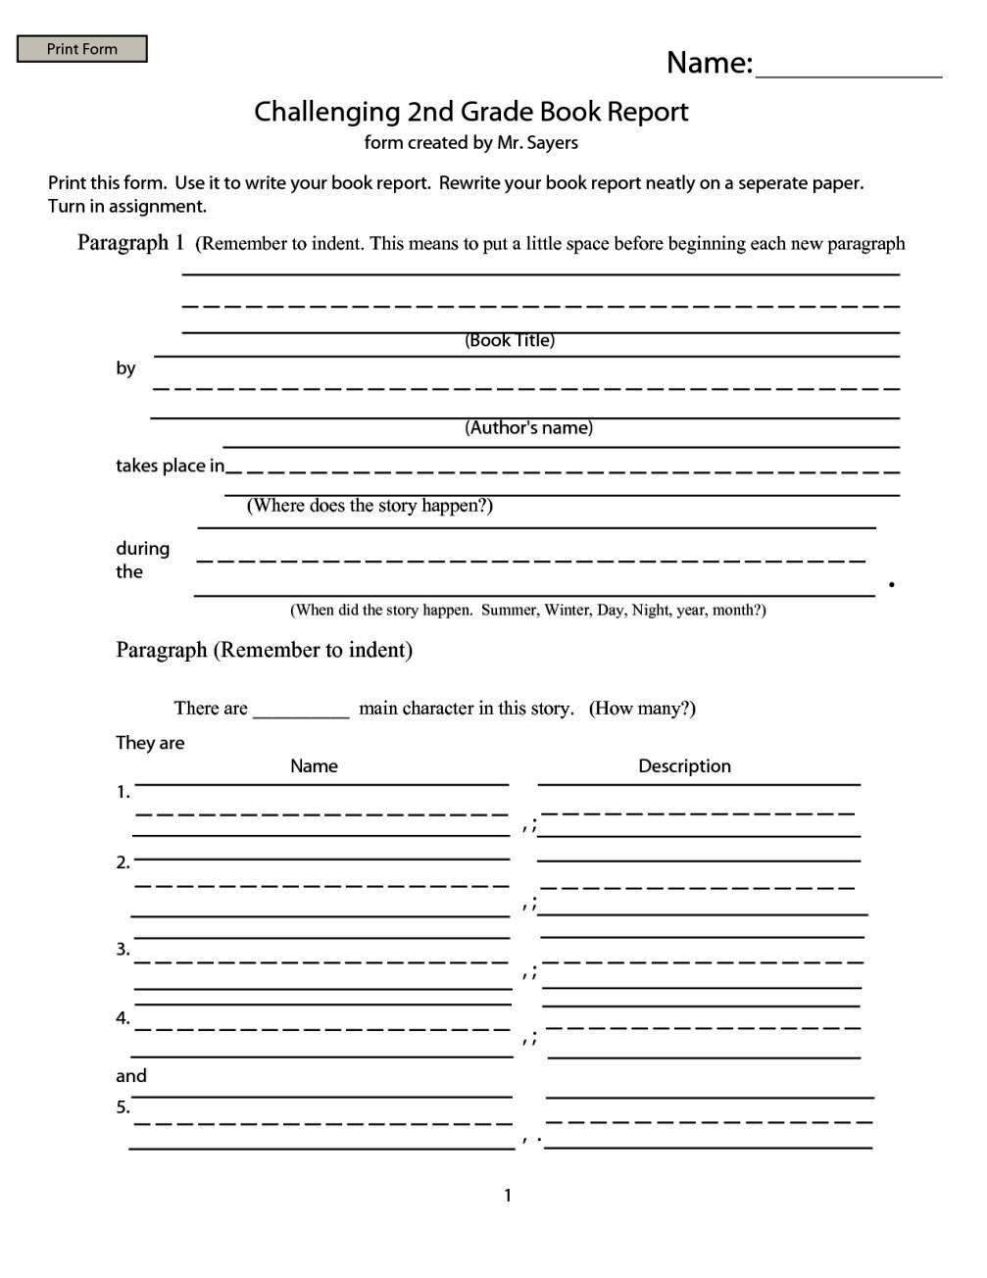 Book Report Template For 2Nd Grade - Sampletemplatess - Sampletemplatess Intended For Second Grade Book Report Template